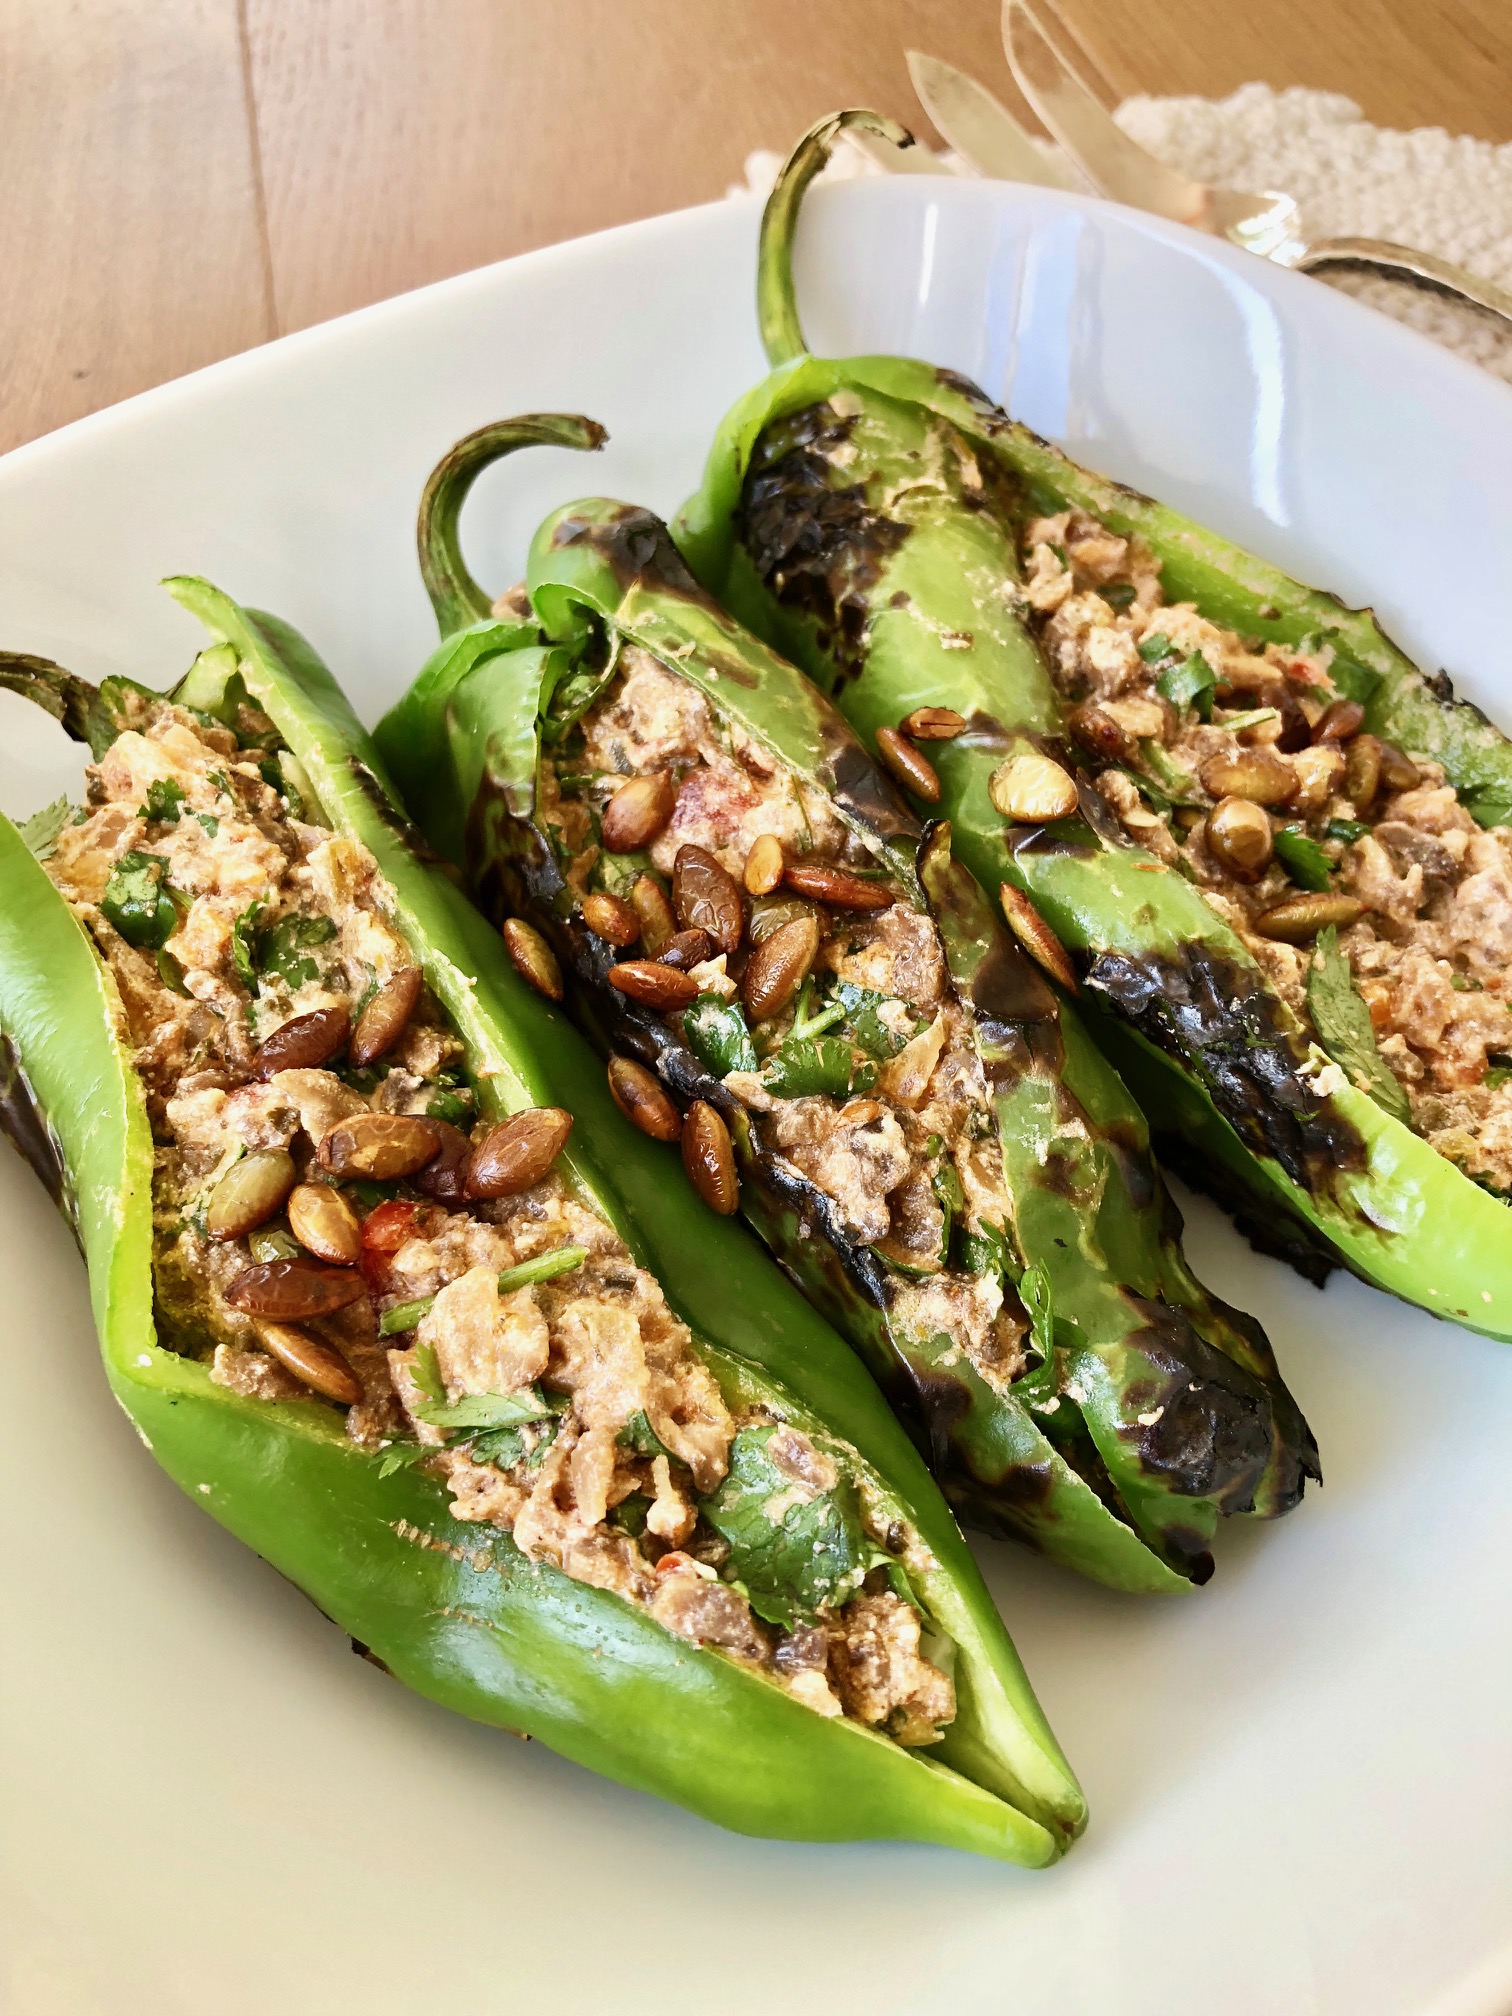 Zesty Mexican Chili Rellenos 1